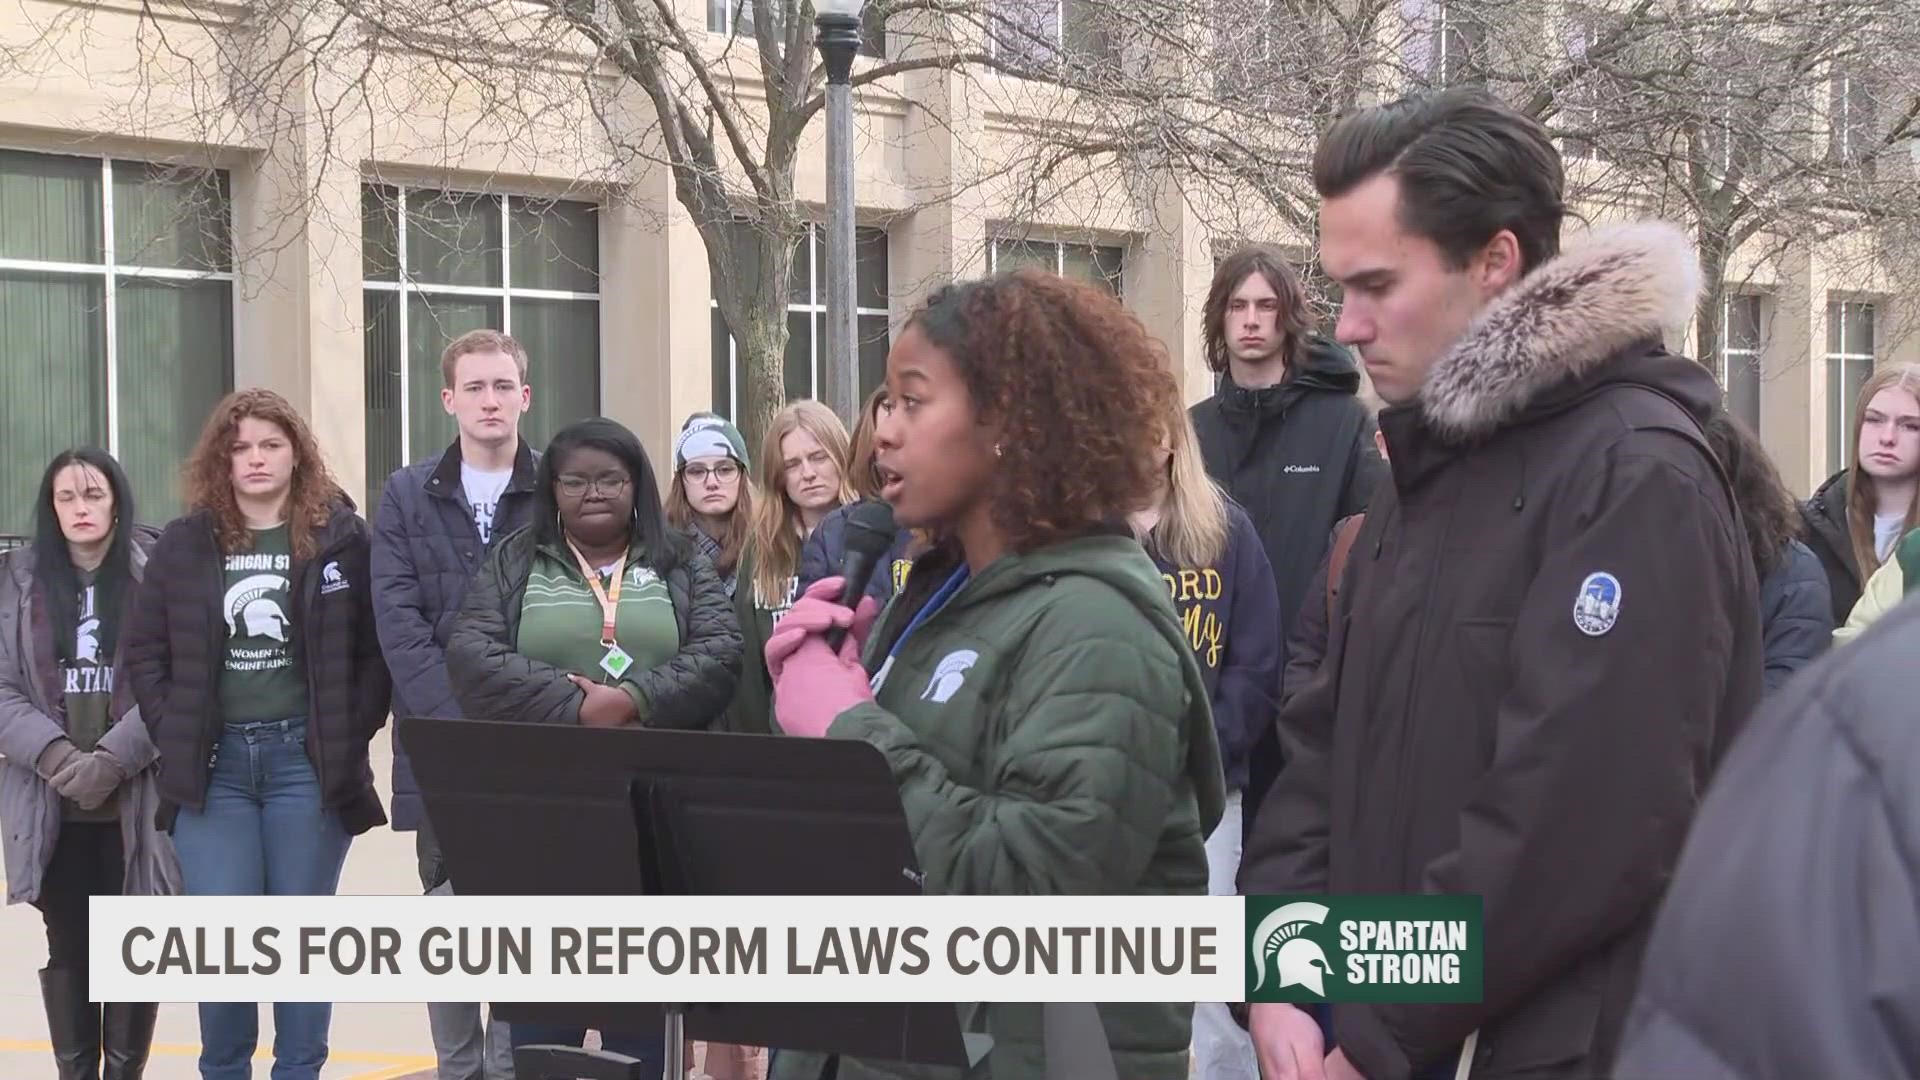 Gun control activist and March For Our Lives founder David Hogg joined Michigan State and Oxford High School students, as well as lawmakers to pass new policy.